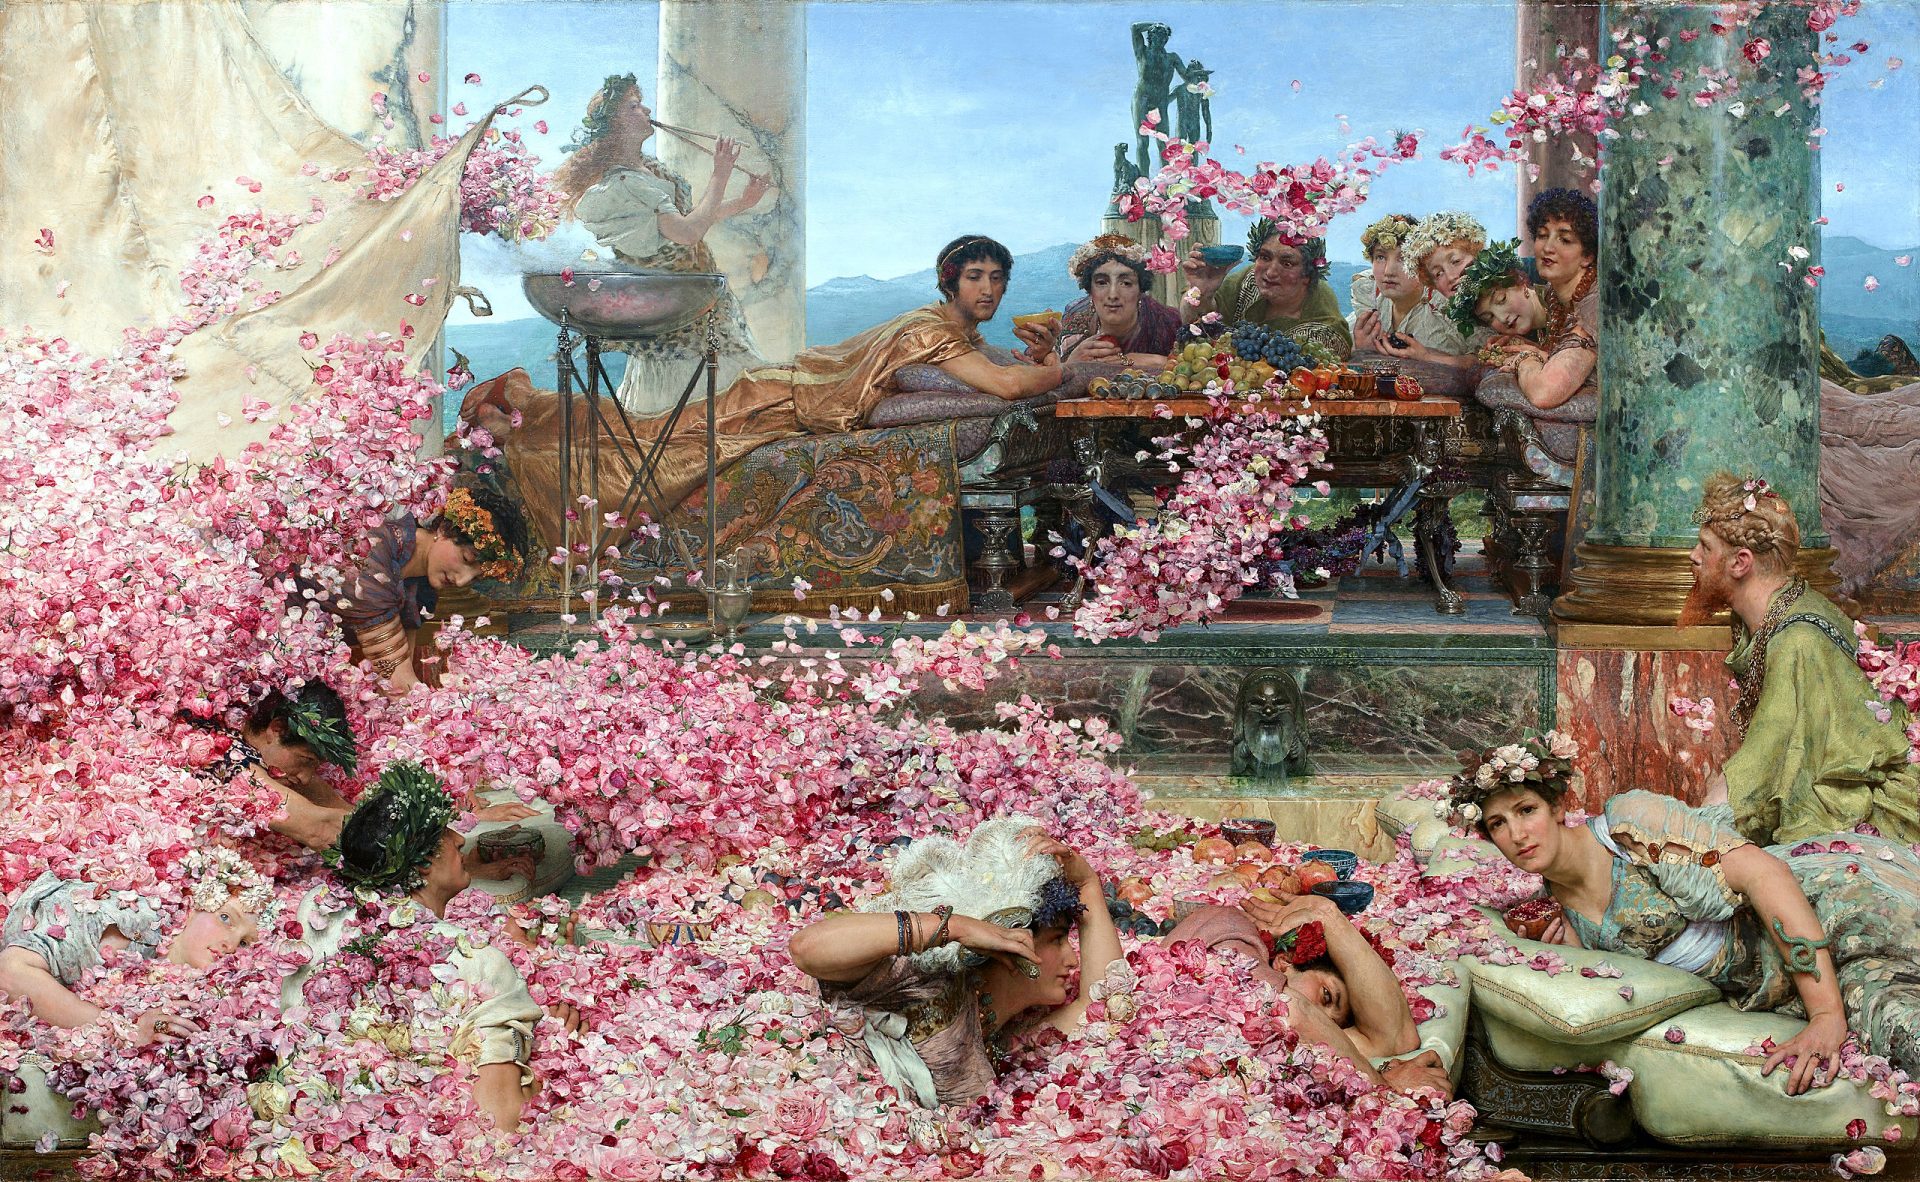 A painting depicting the young Roman emperor Elagabalus hosting a banquet. It shows a group of Roman diners at a banquet, being swamped by drifts of pink rose petals falling from a false ceiling above.